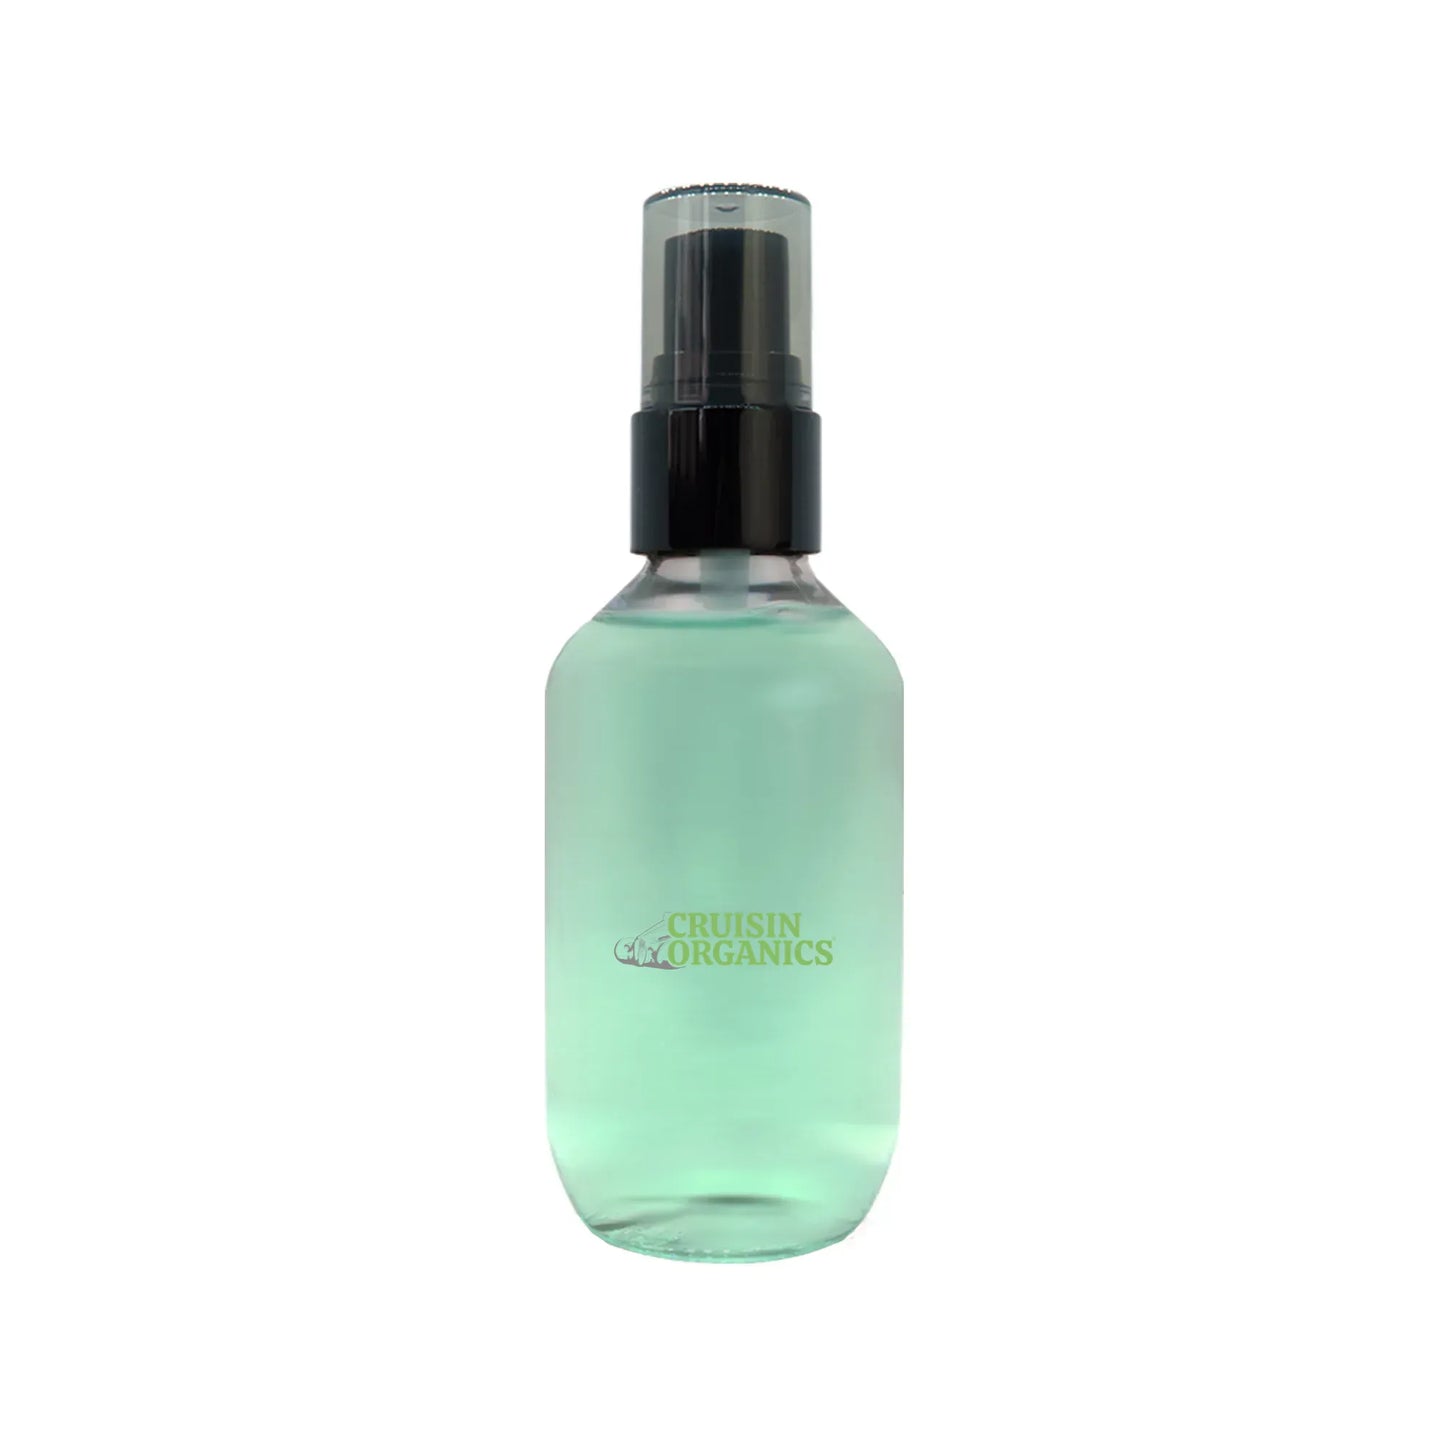 Cruisin Organics Setting Spray contains natural antioxidants from plant extracts to refresh and hold your makeup in place all day. The innovative formula reduces the appearance of pores and sets your makeup for long-lasting wear. Use without fear of disturbing your makeup. Let your skin thank you for this product.